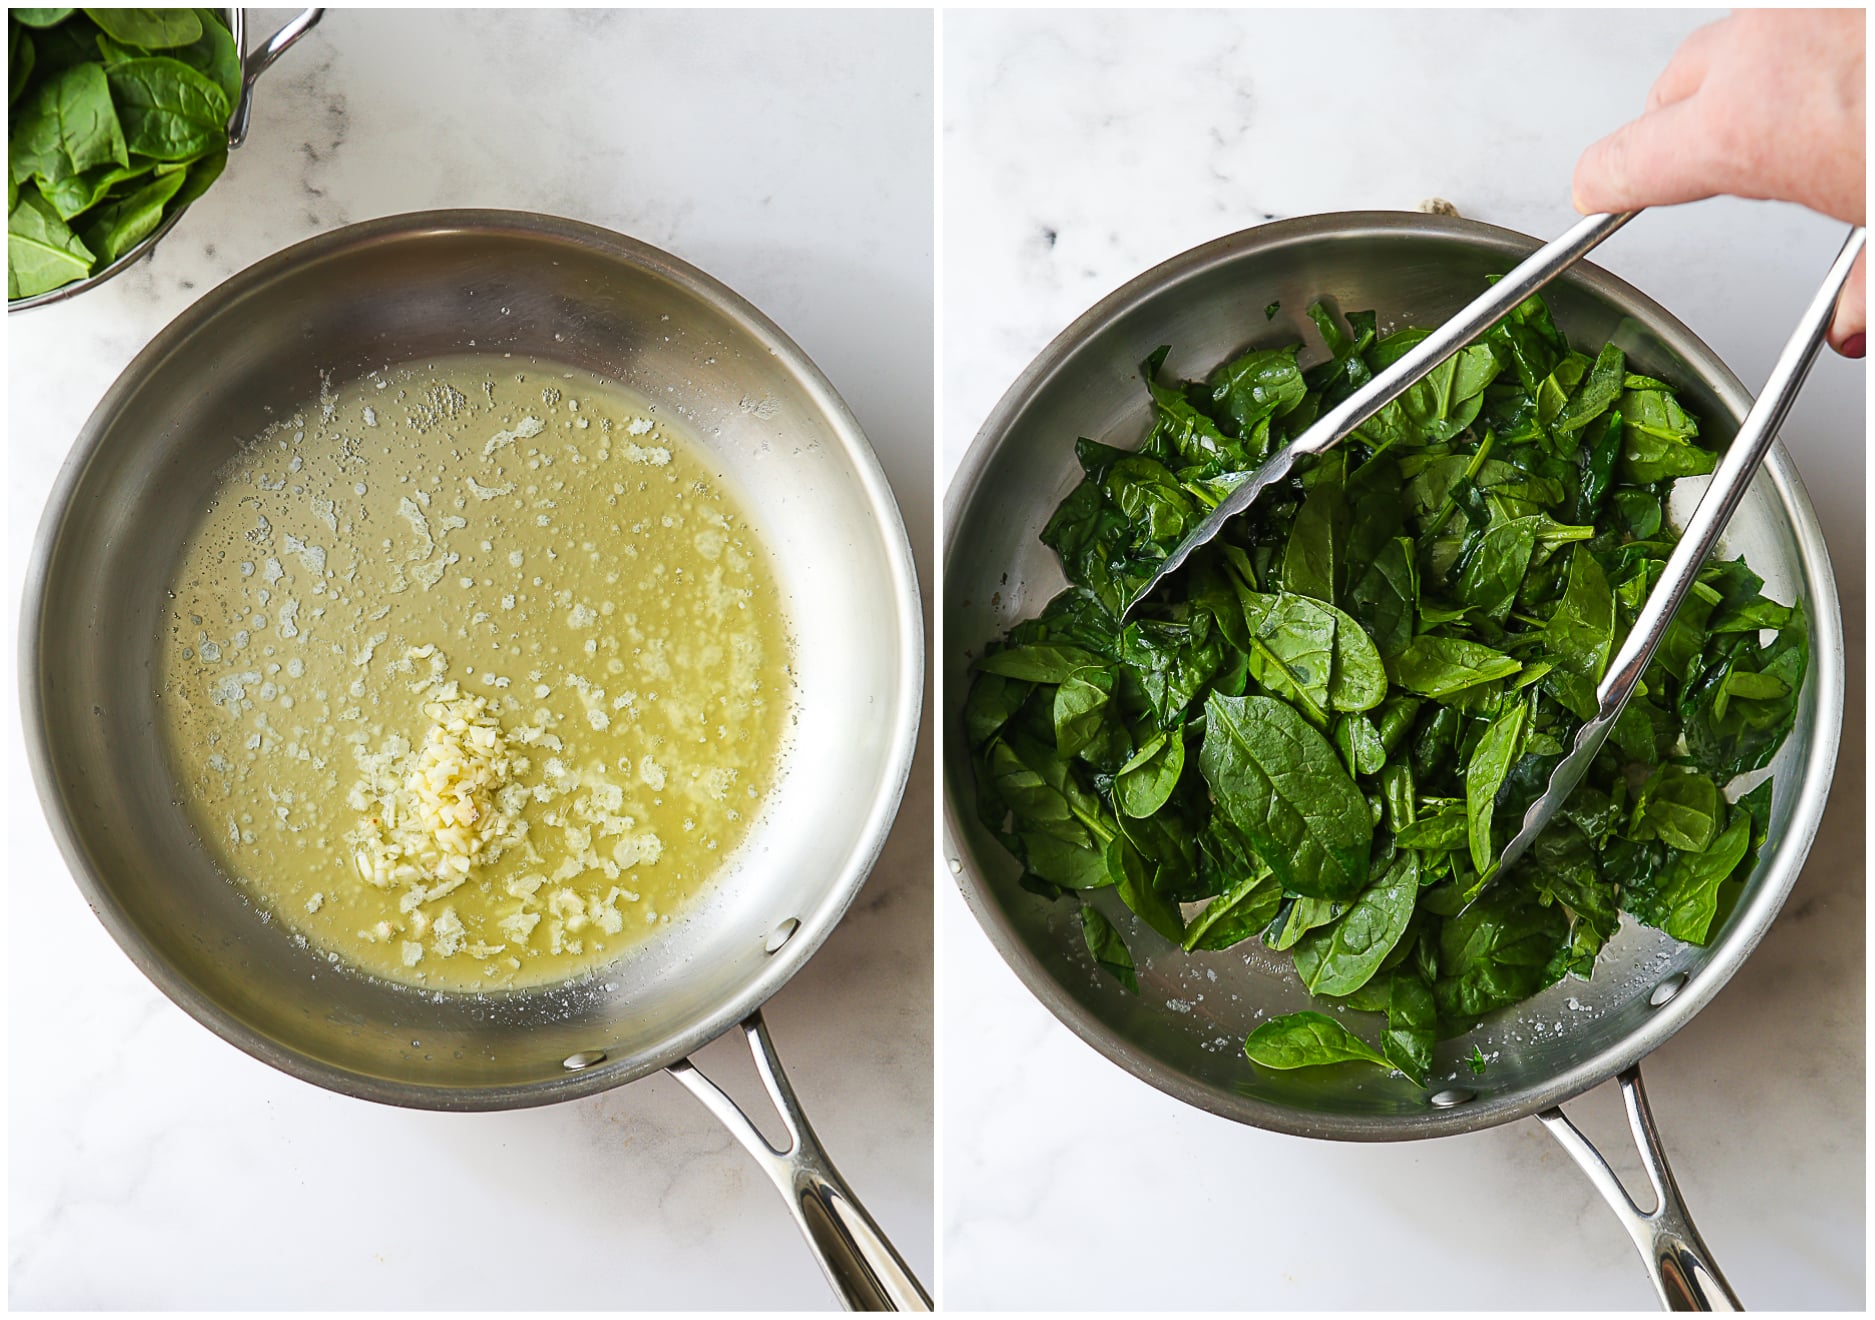 melting butter, adding garlic, and tossing in spinach